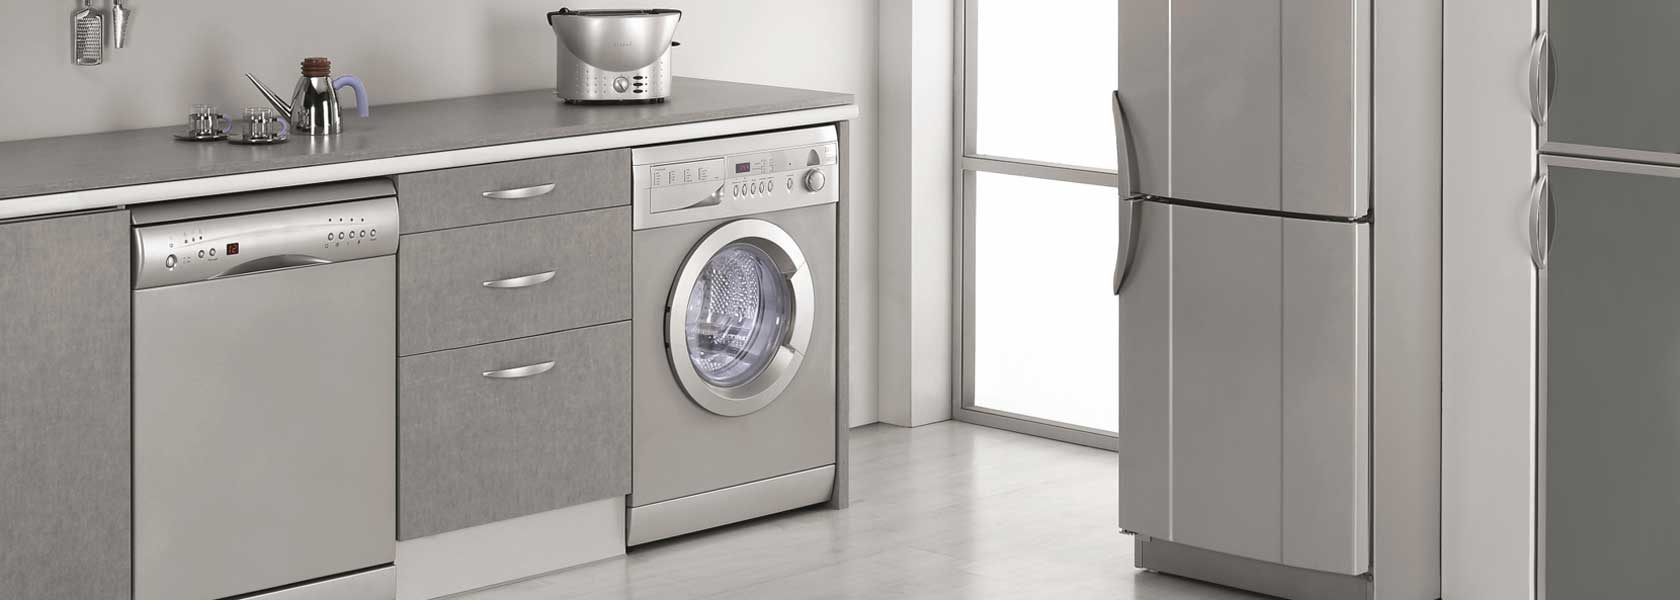 A kitchen with a washing machine under the counter